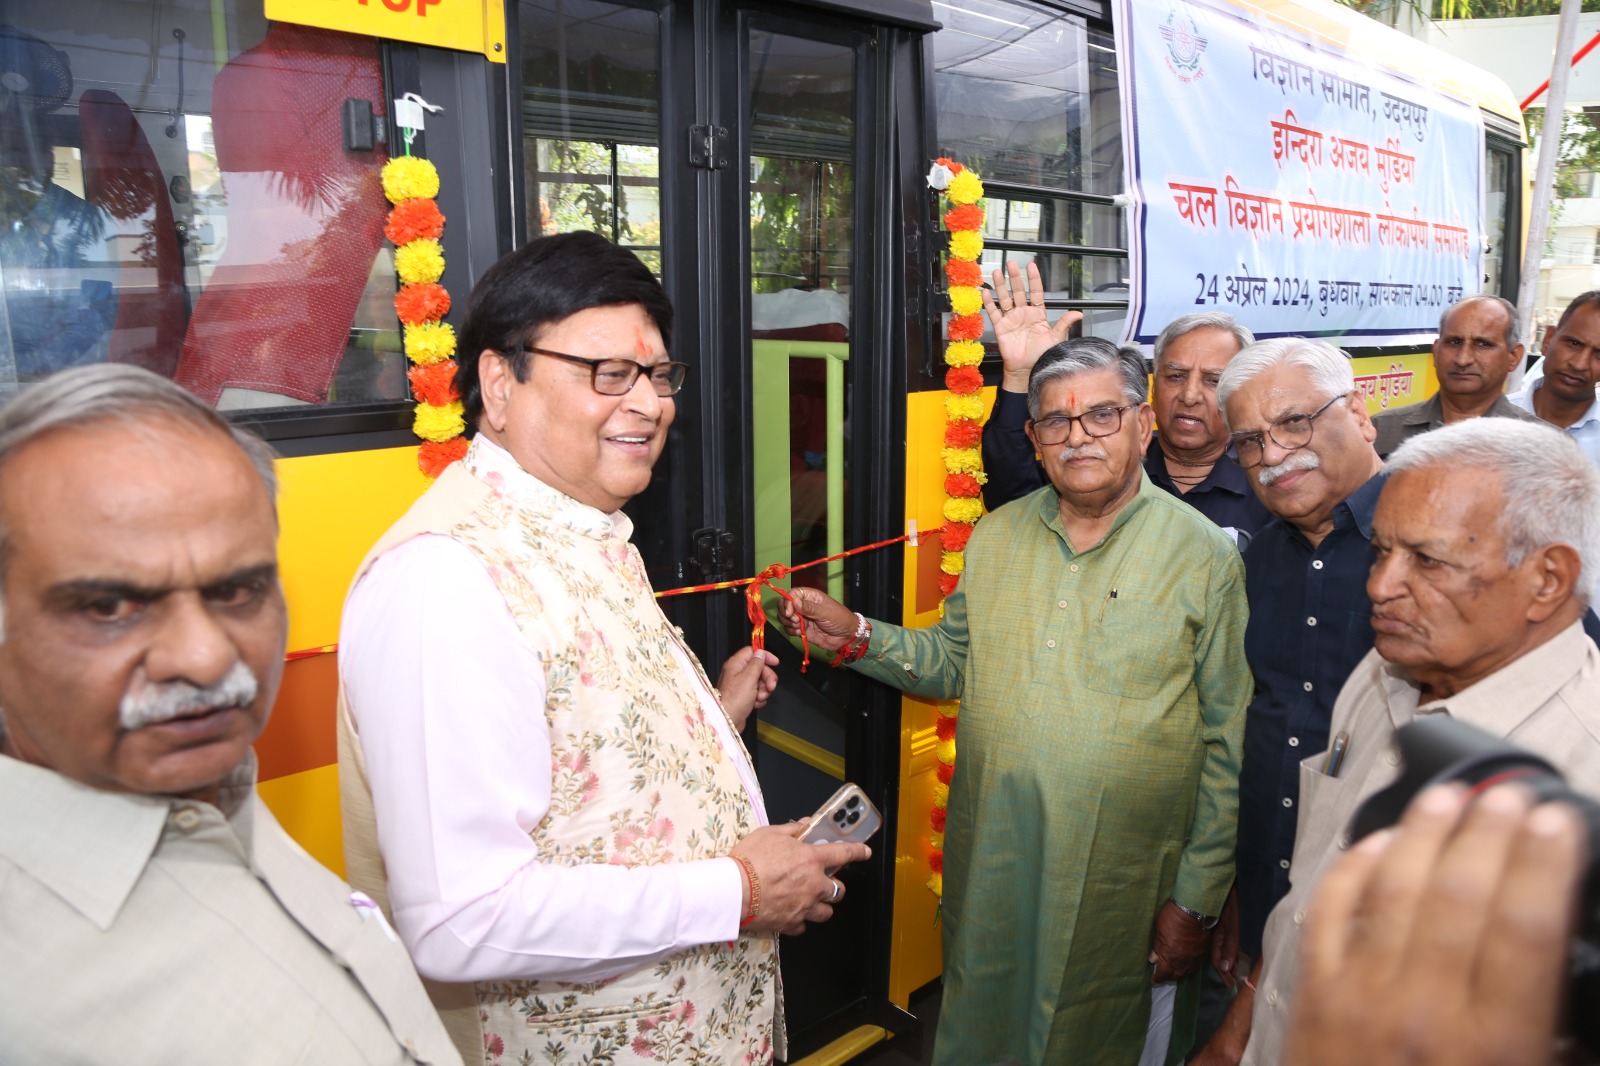 Inauguration of Science Laboratory at Chal Science Committee by Indira Ajay Murdia